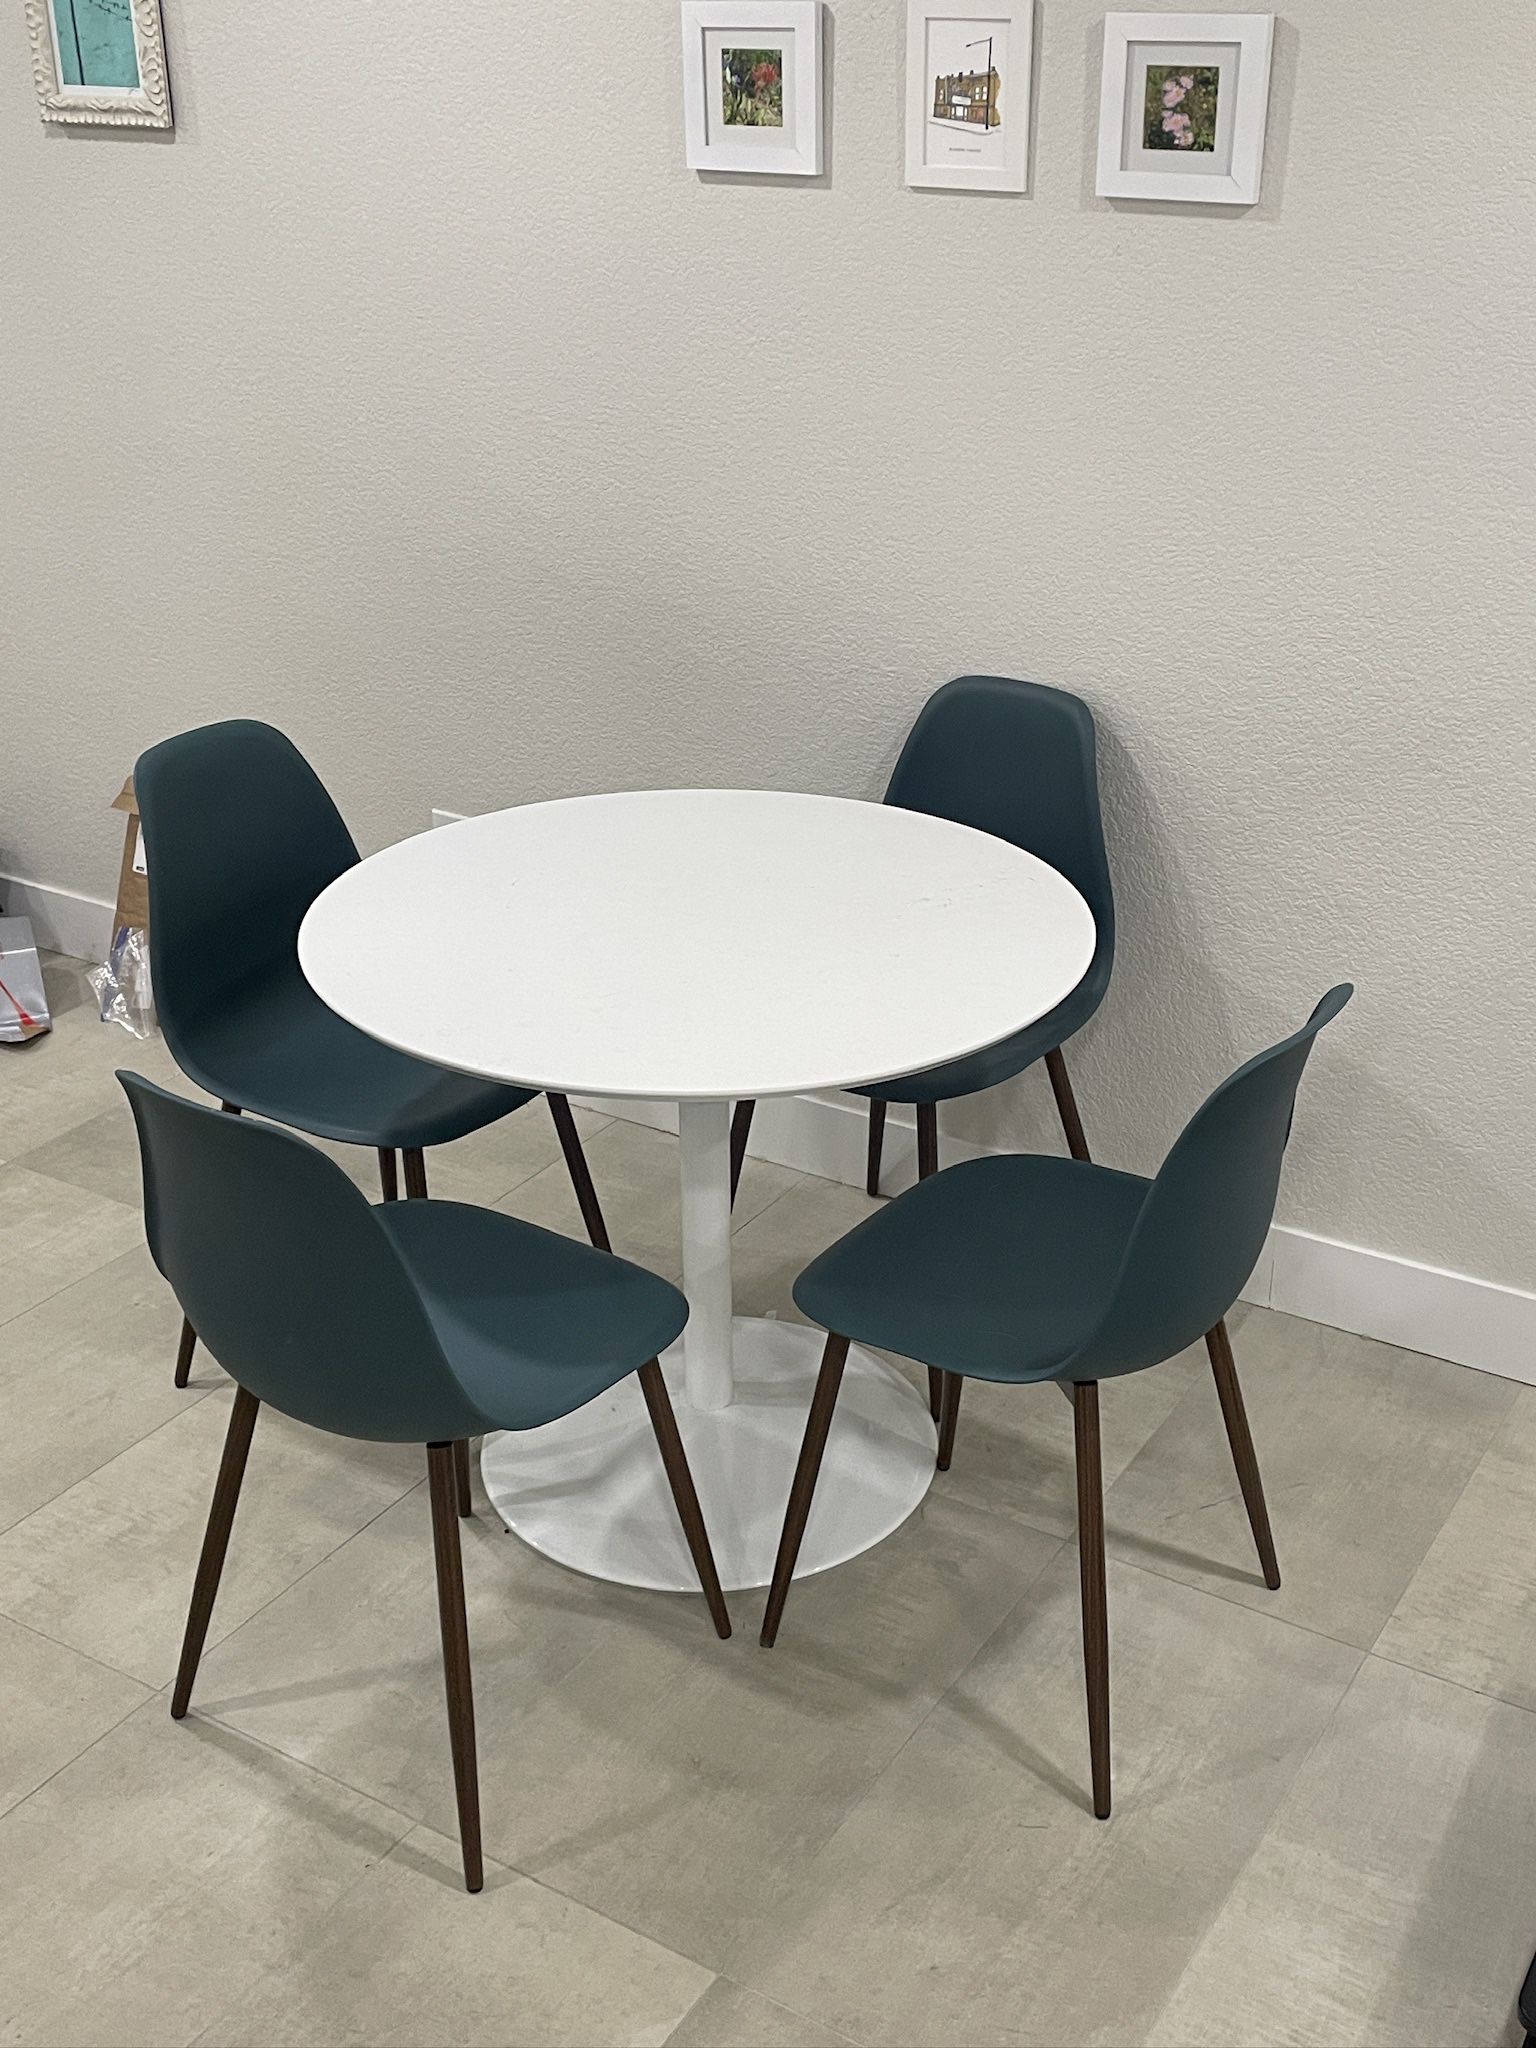 Small table & chairs